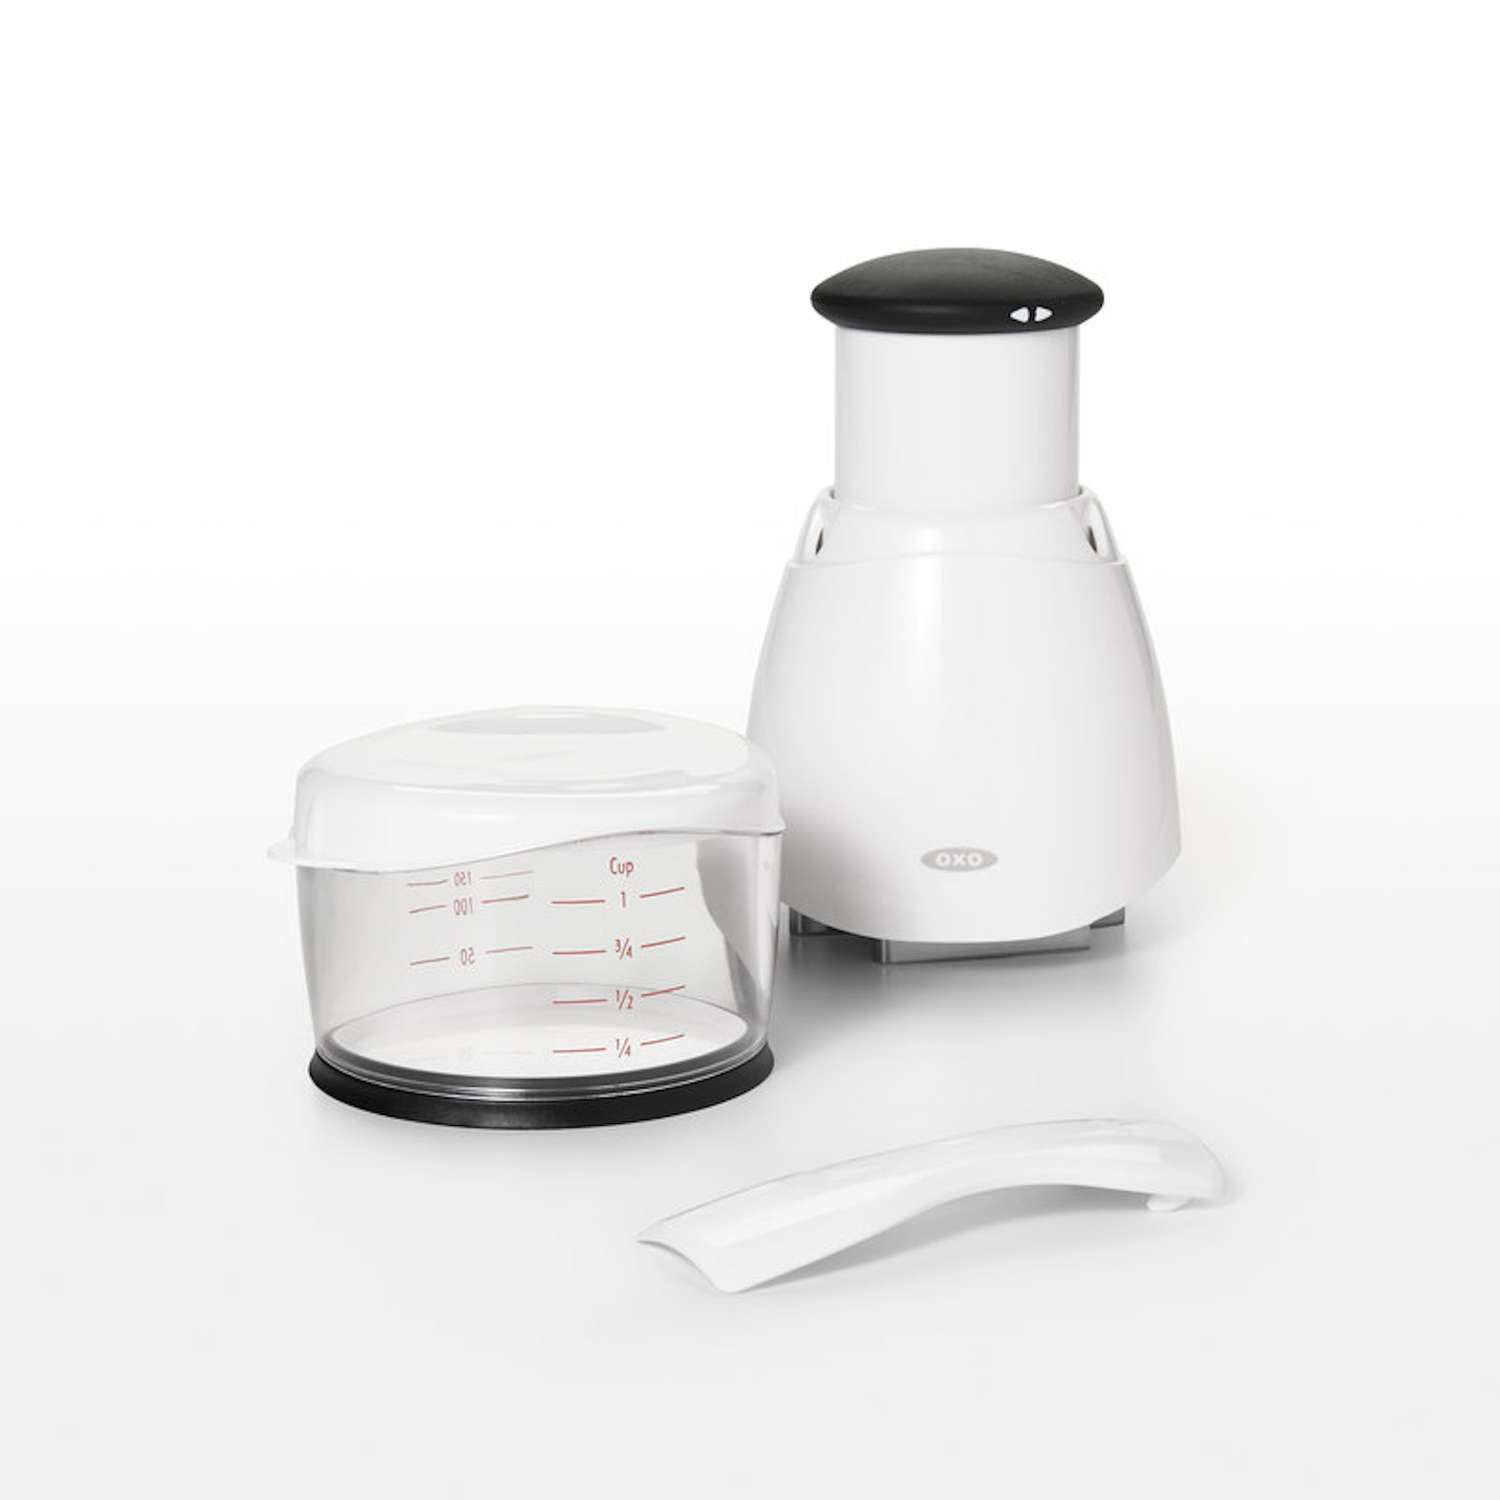  OXO Good Grips Ground Meat Chopper,Black : Home & Kitchen